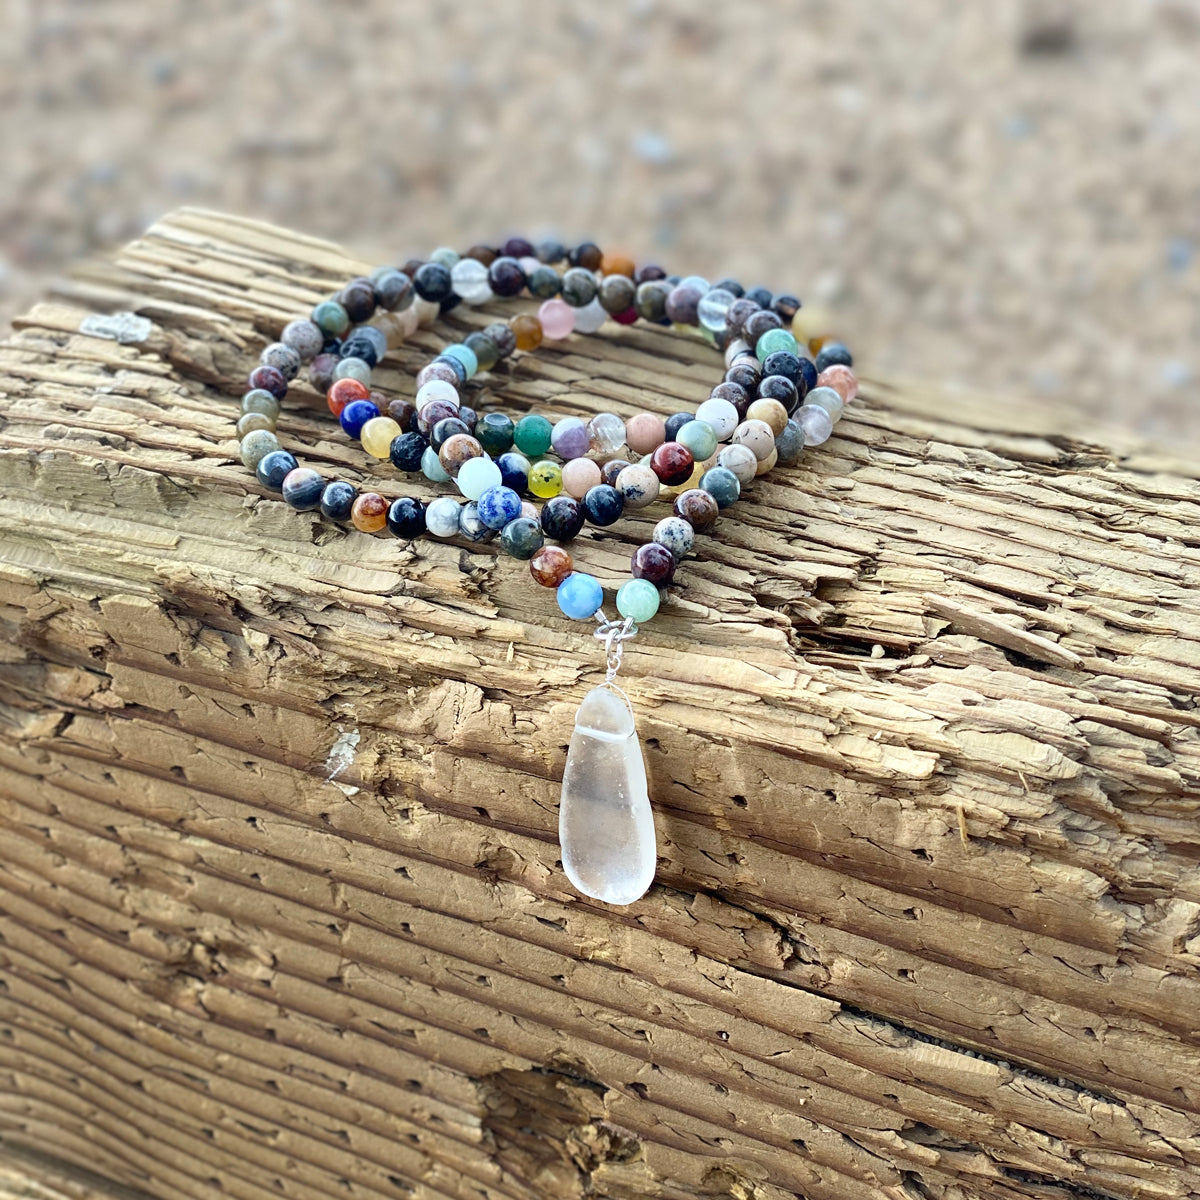 Mother Earth Healing Crystals Mindfulness Necklace with Sea Glass to support change that comes from within from Gogh Jewelry Design.